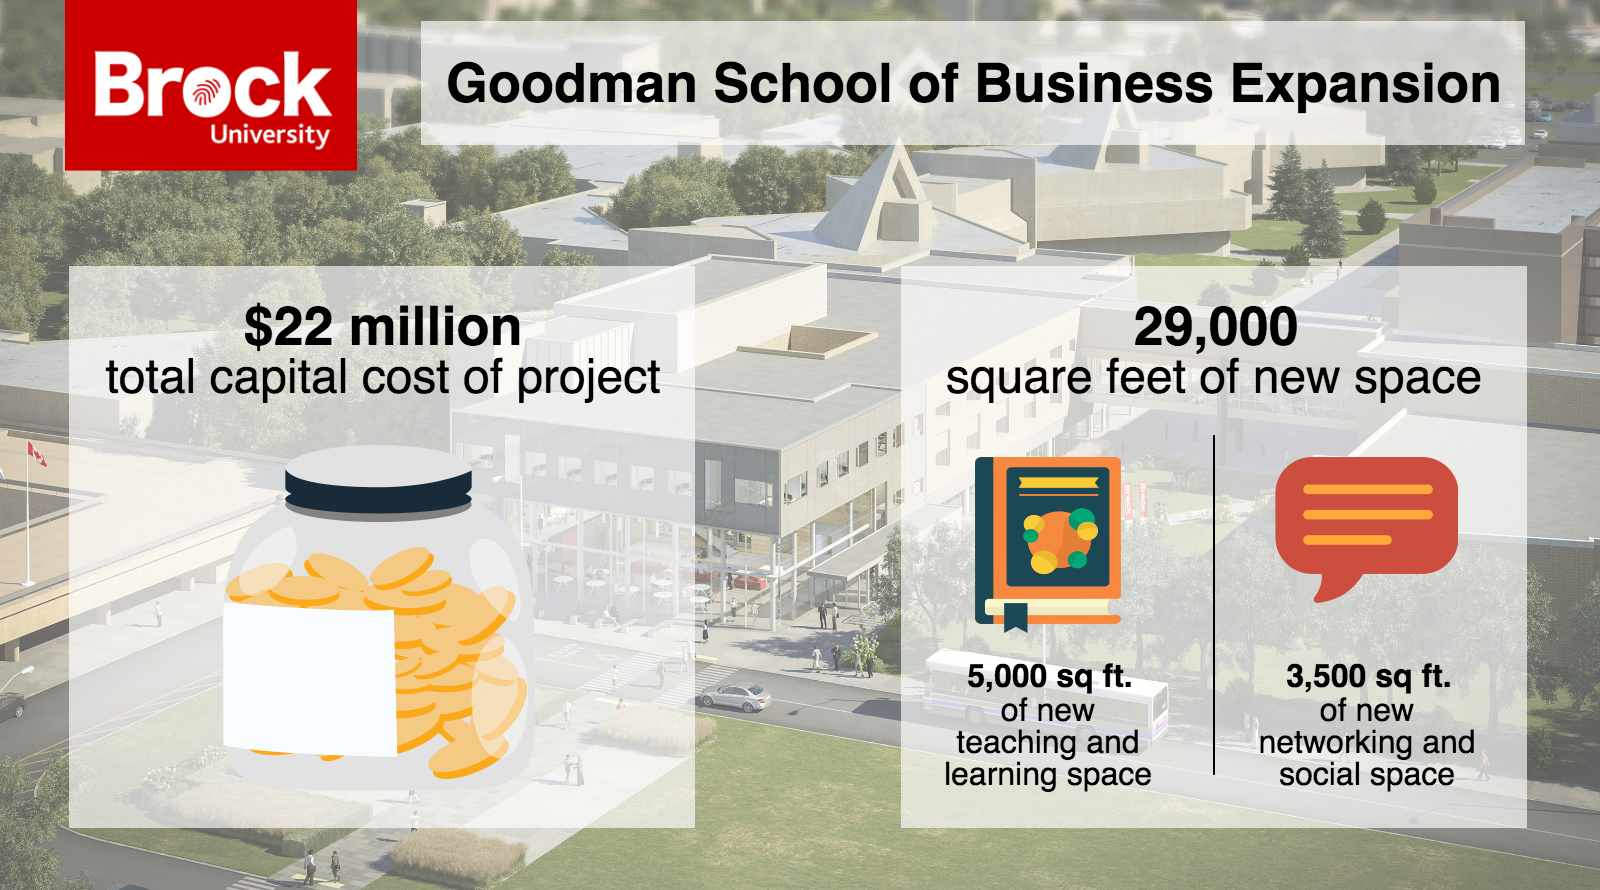 info graphic showing cost of goodman school expansion